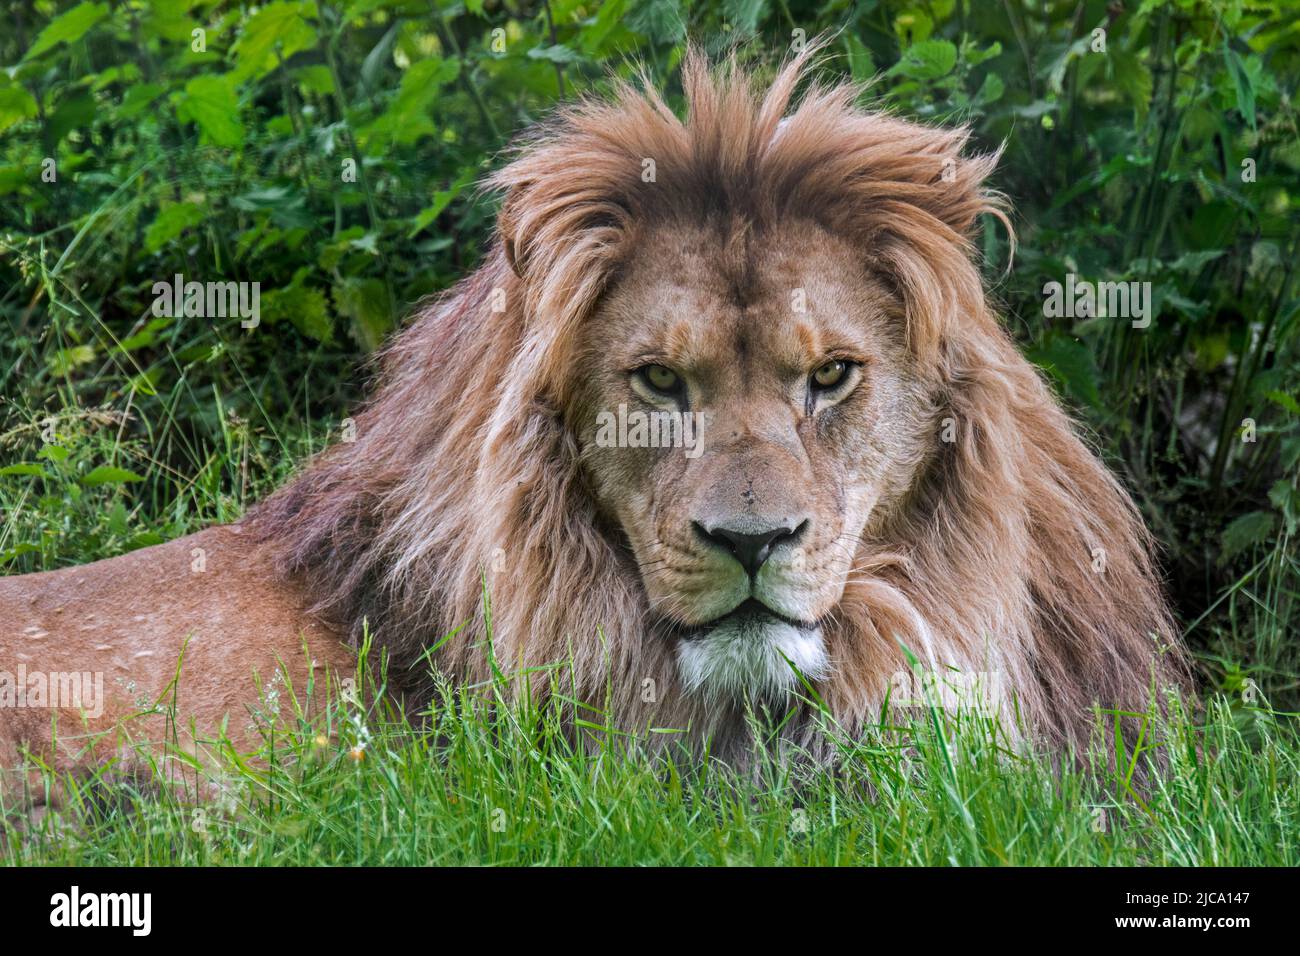 Barbary lion / North African lion / Berber lion / Atlas lion / Egyptian lion (Panthera leo leo) fierce looking male in zoo, extinct in the wild Stock Photo